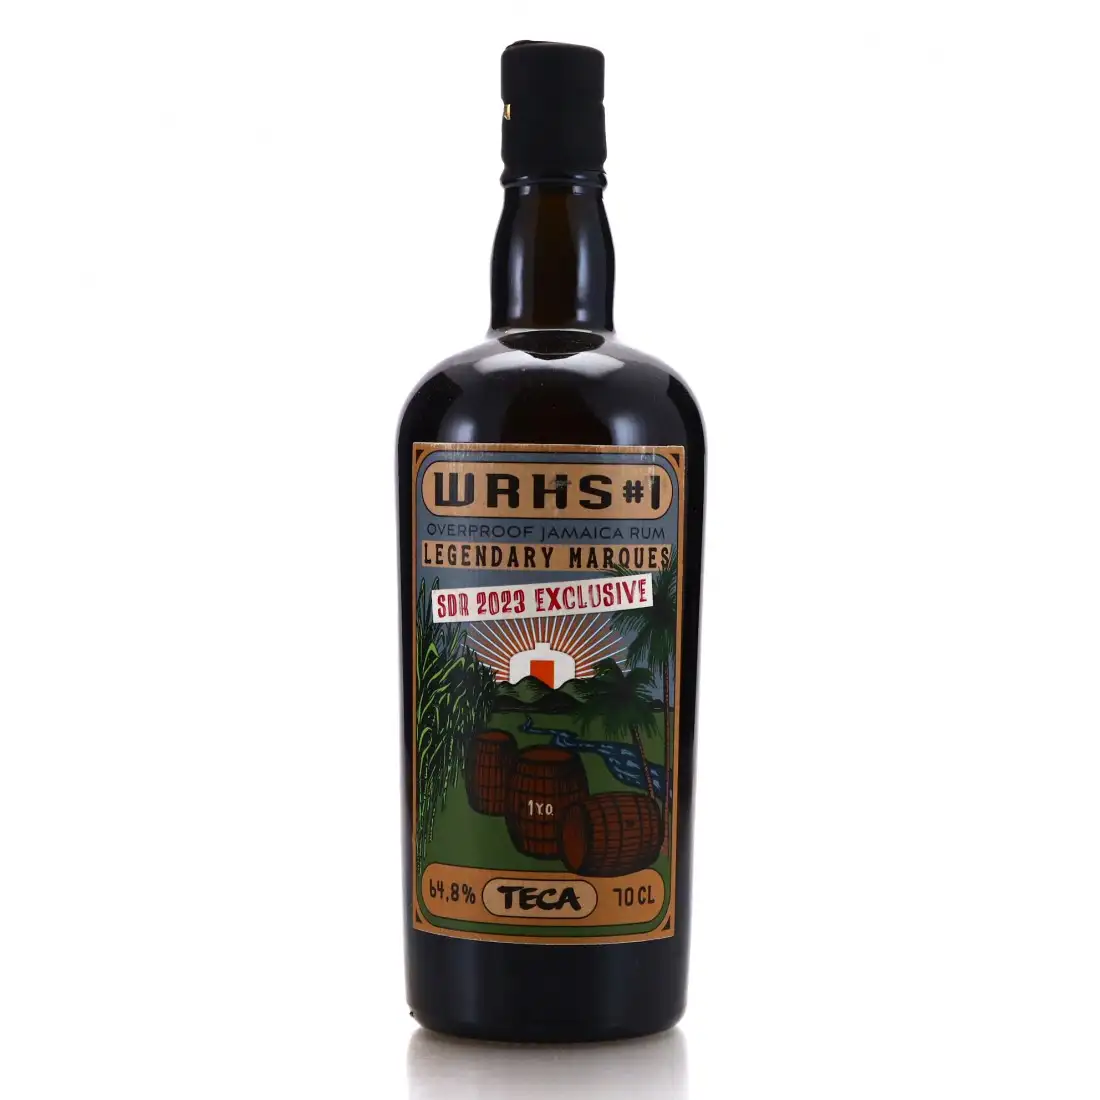 Image of the front of the bottle of the rum WRHS#1 Legendary Marques (SDR 2023 Exclusive) TECA